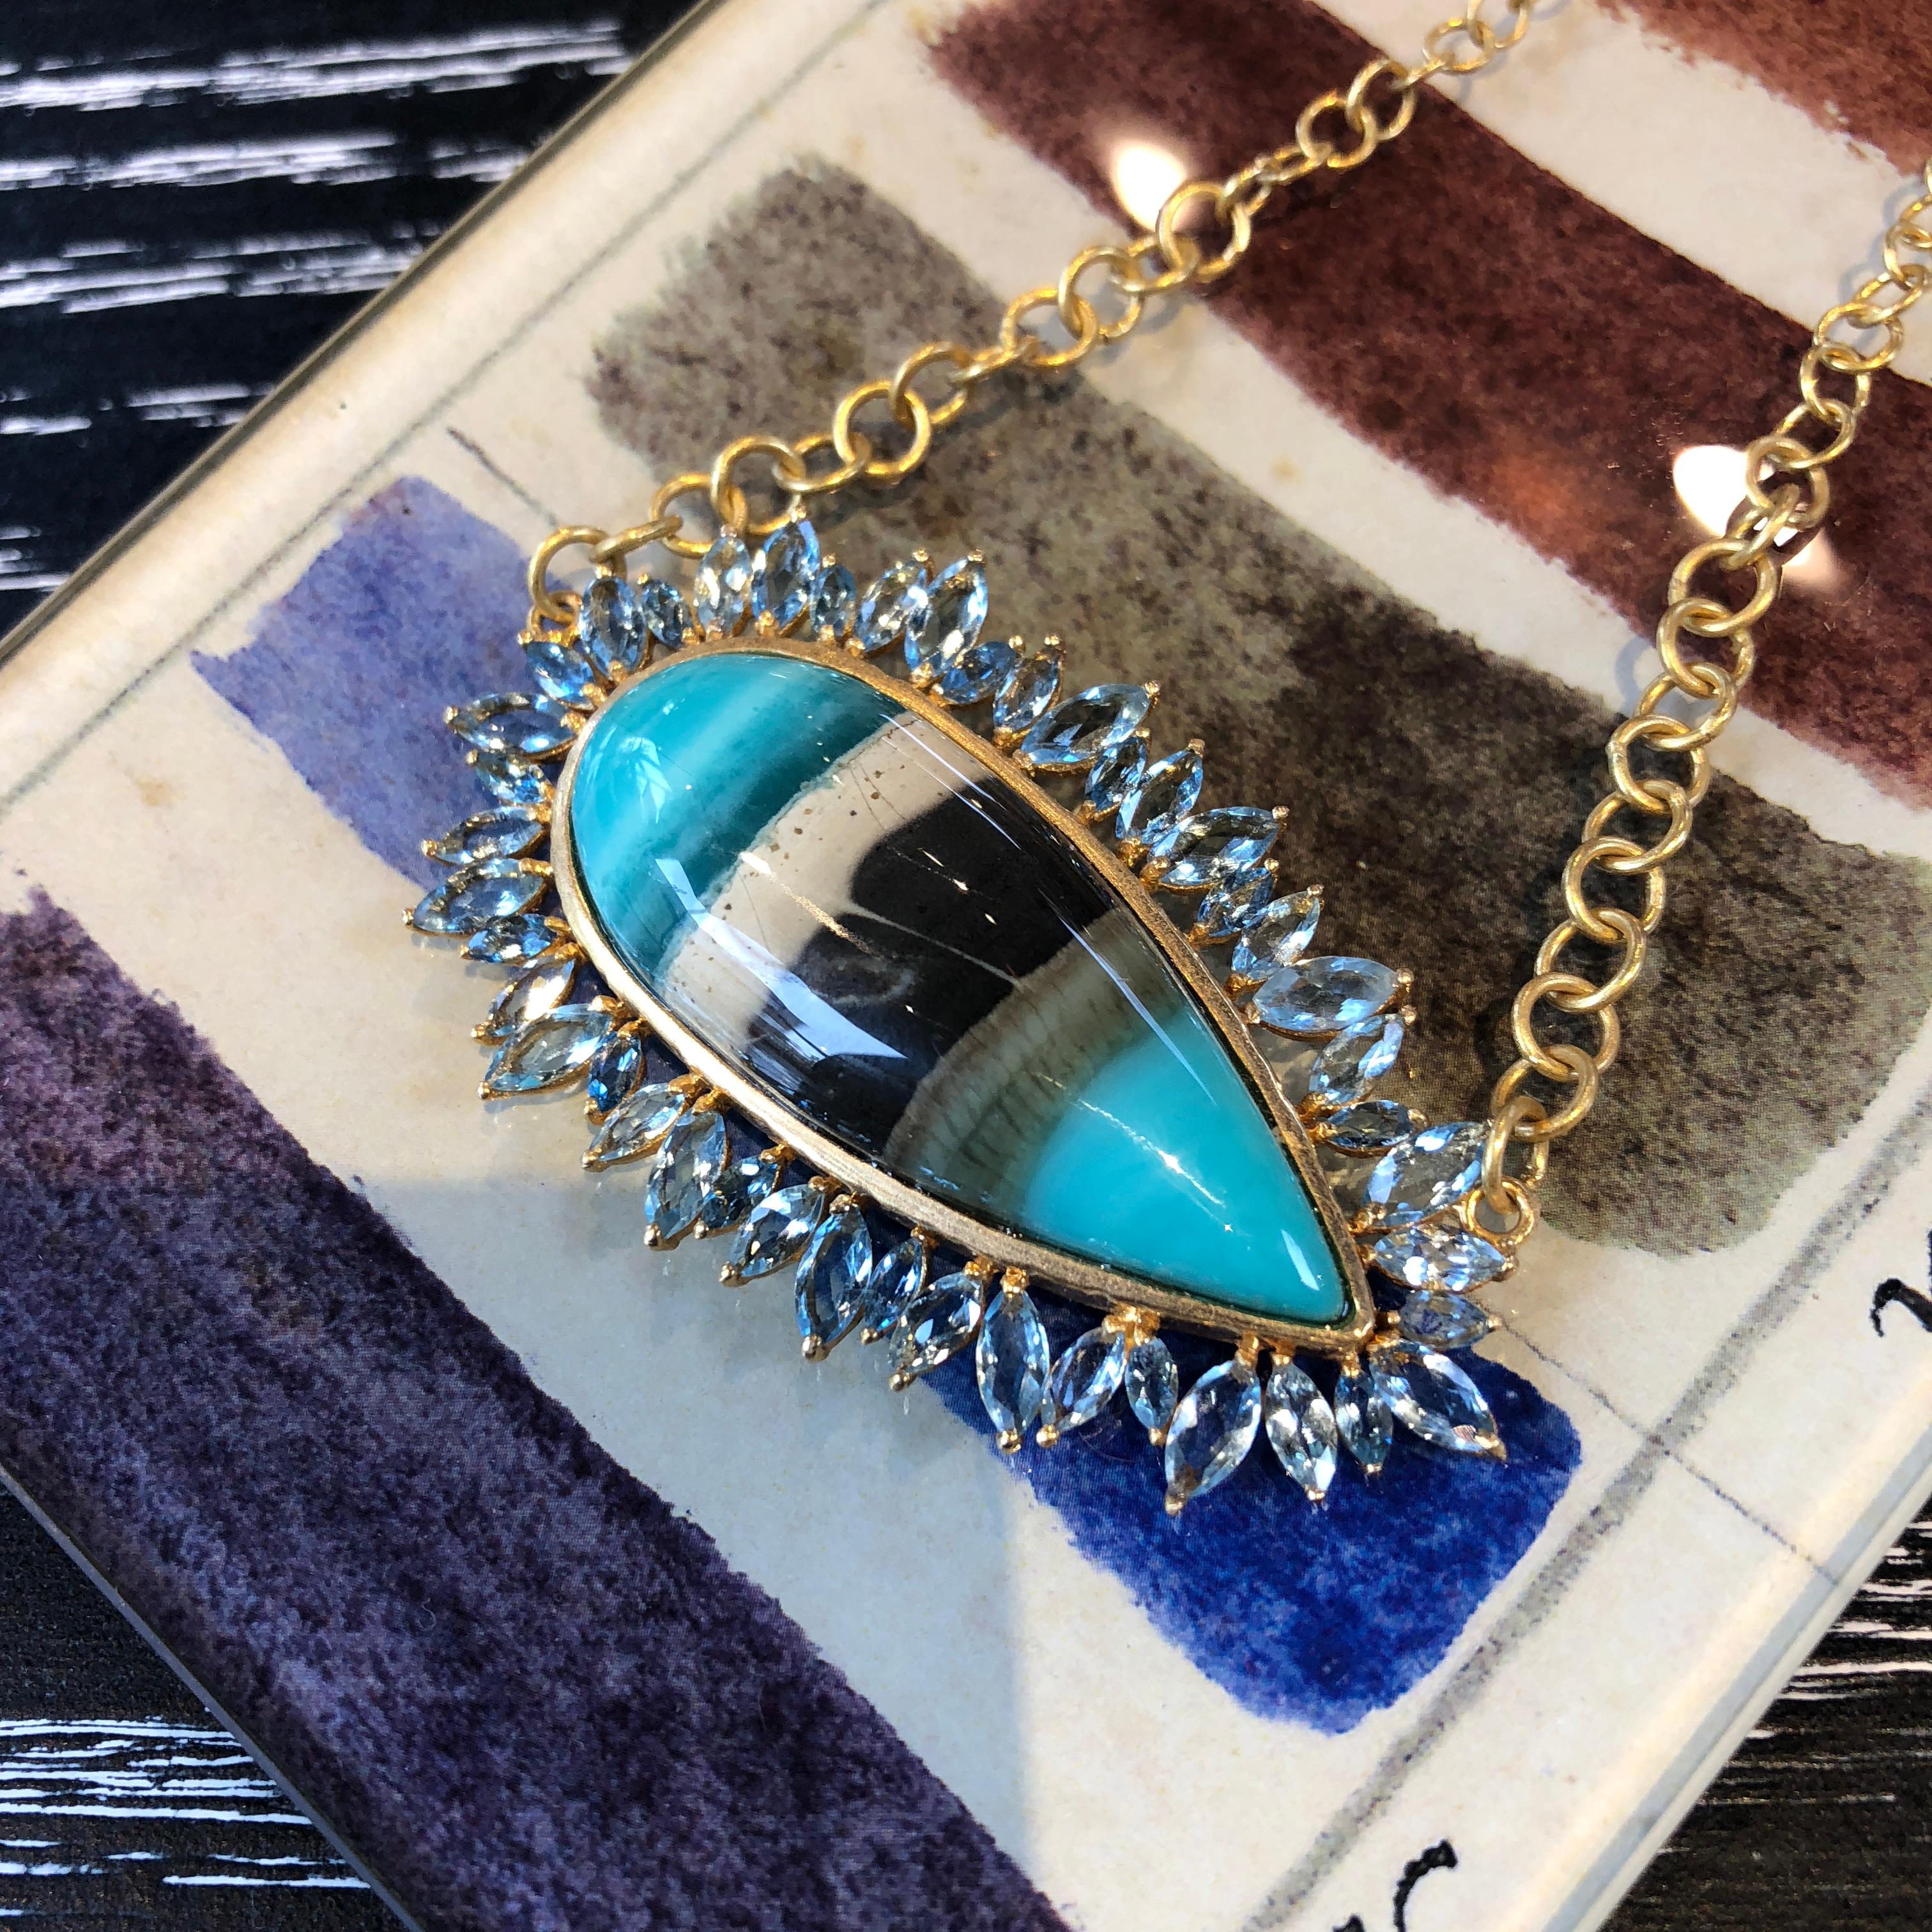 This spectacular Petrified Opalized Wood Pear Cabachon is set sideways with marquis shaped faceted Aquamarines surrounding the center stone.  This piece is perfect for someone who appreciates one of a kind jewelry, and organic design.  The necklace